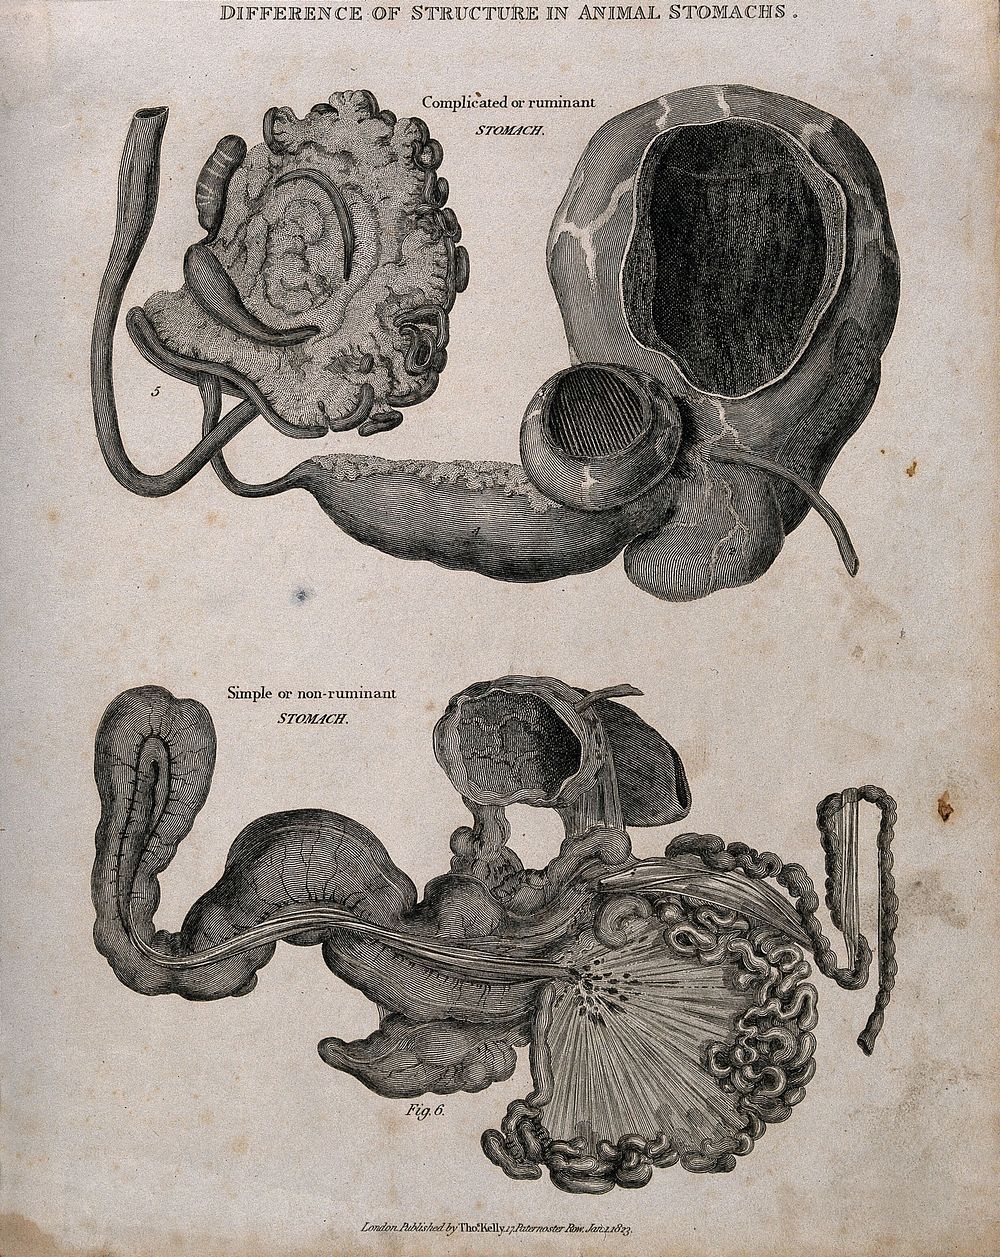 Dissections of two animal stomachs: one ruminant, the other non-ruminant. Etching, 1823.